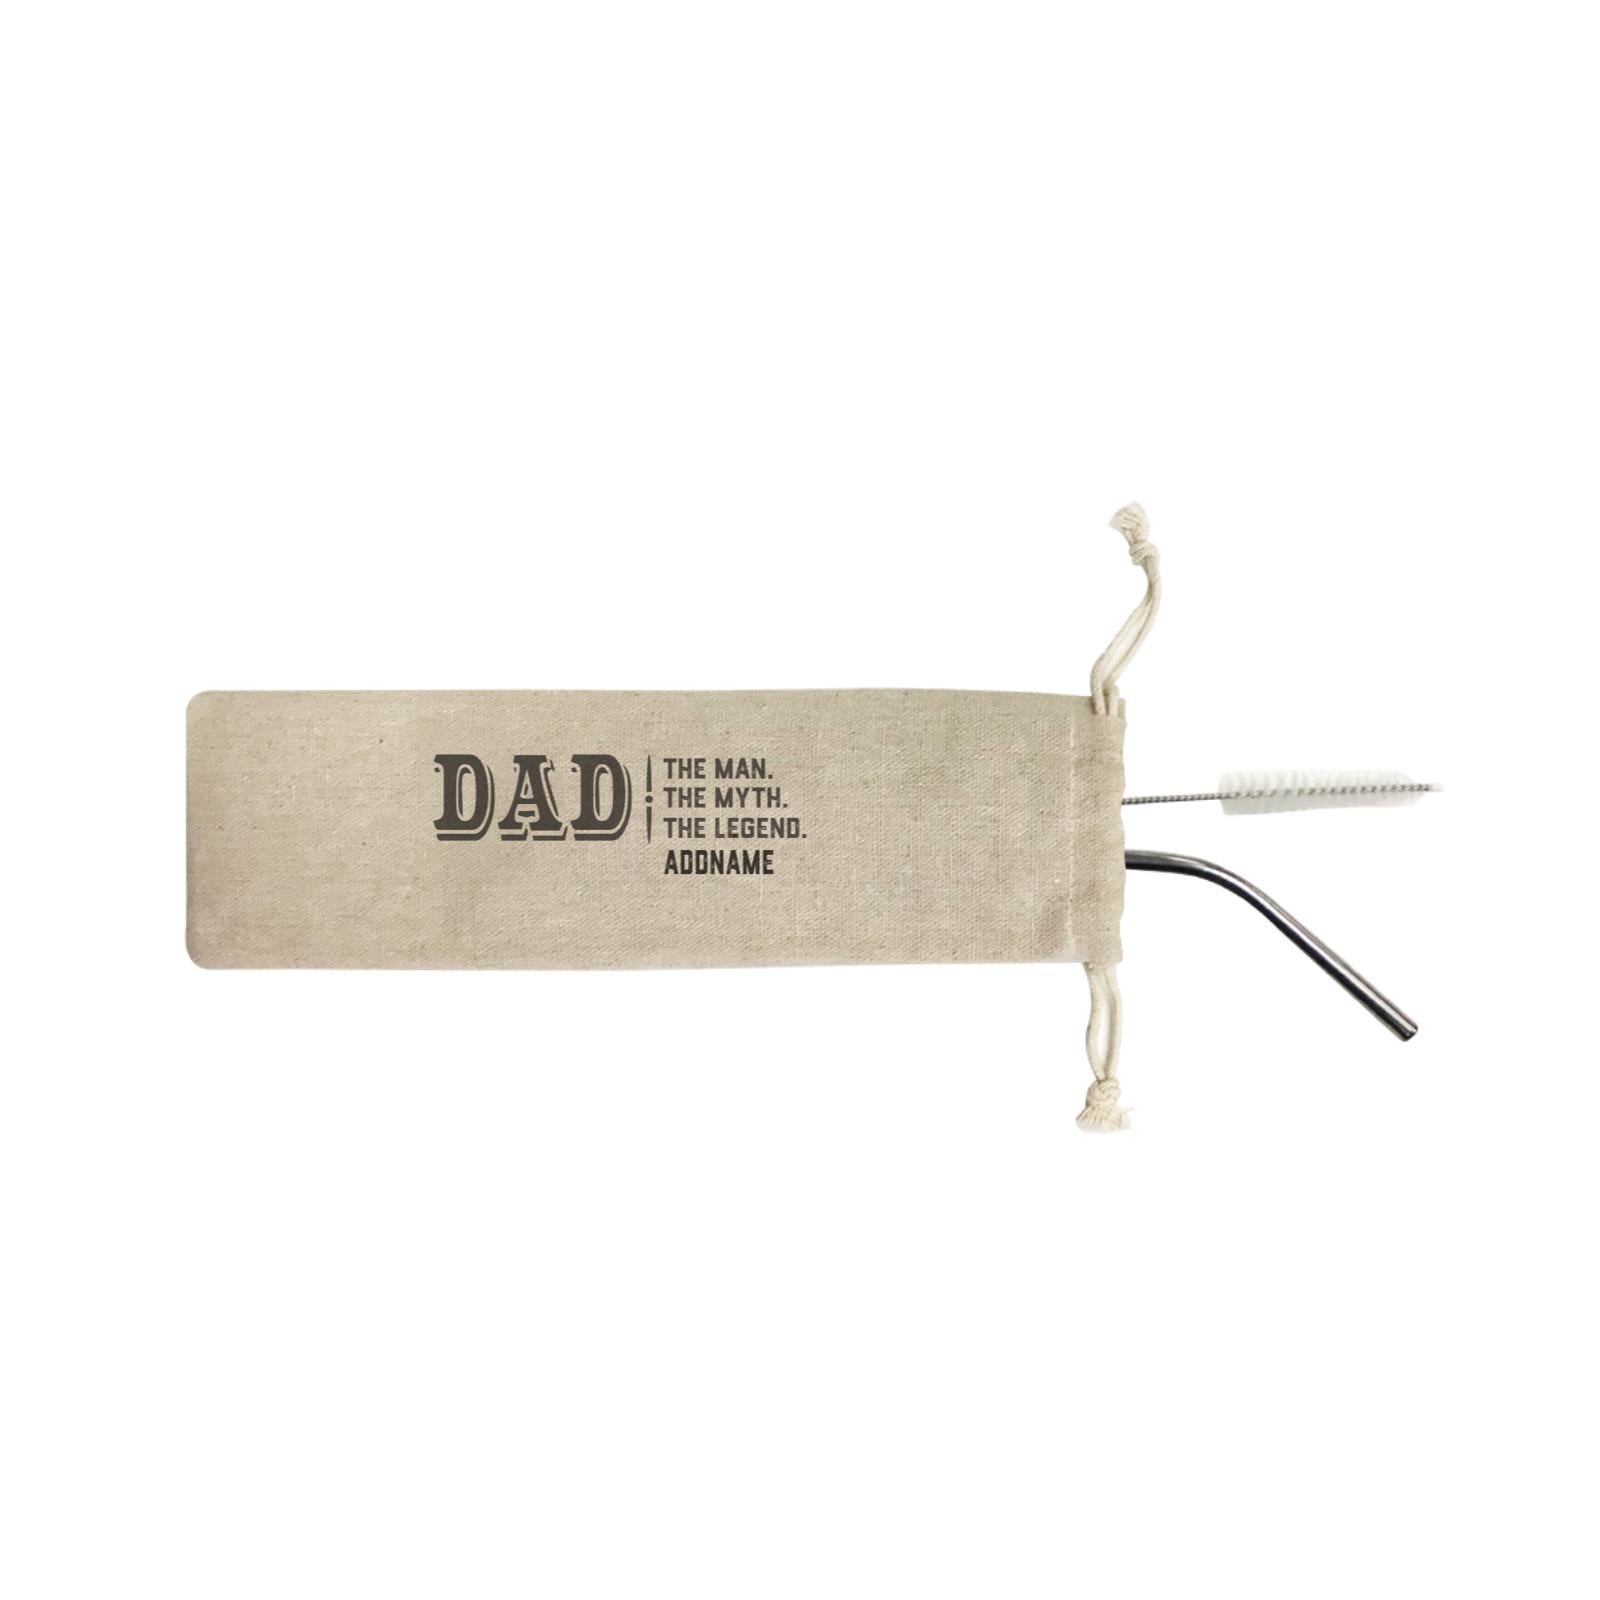 Dad The Man The Myth The Legend Addname SB 2-in-1 Stainless Steel Straw Set In a Satchel